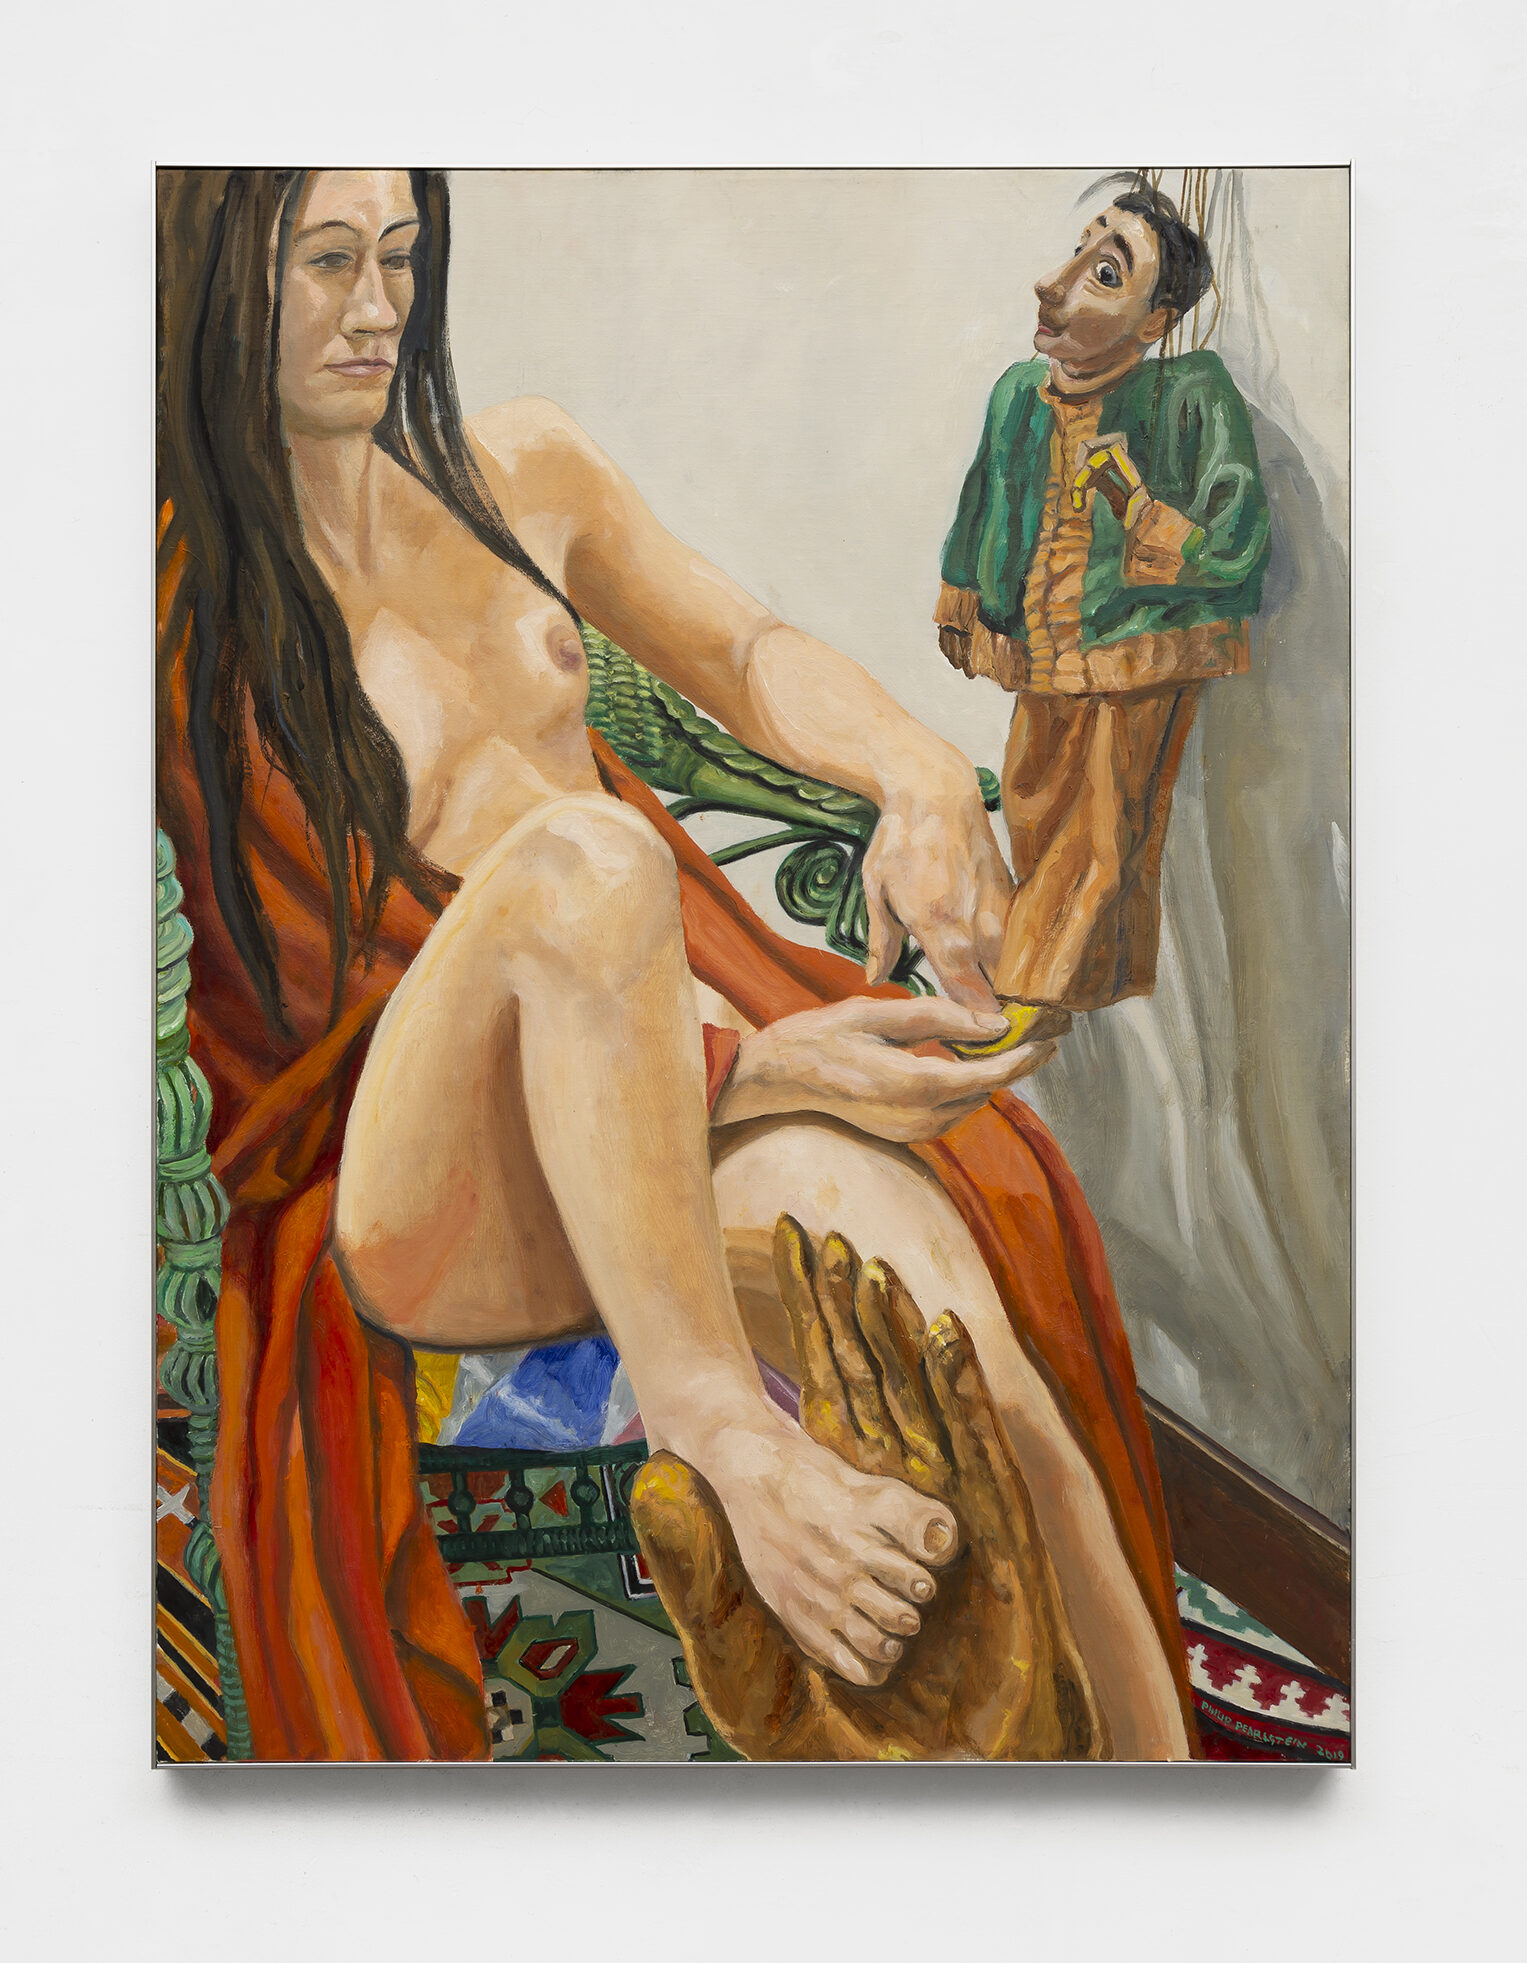 Model in Robe with Burmese Marionette, Oil on Canvas, 30 x 24